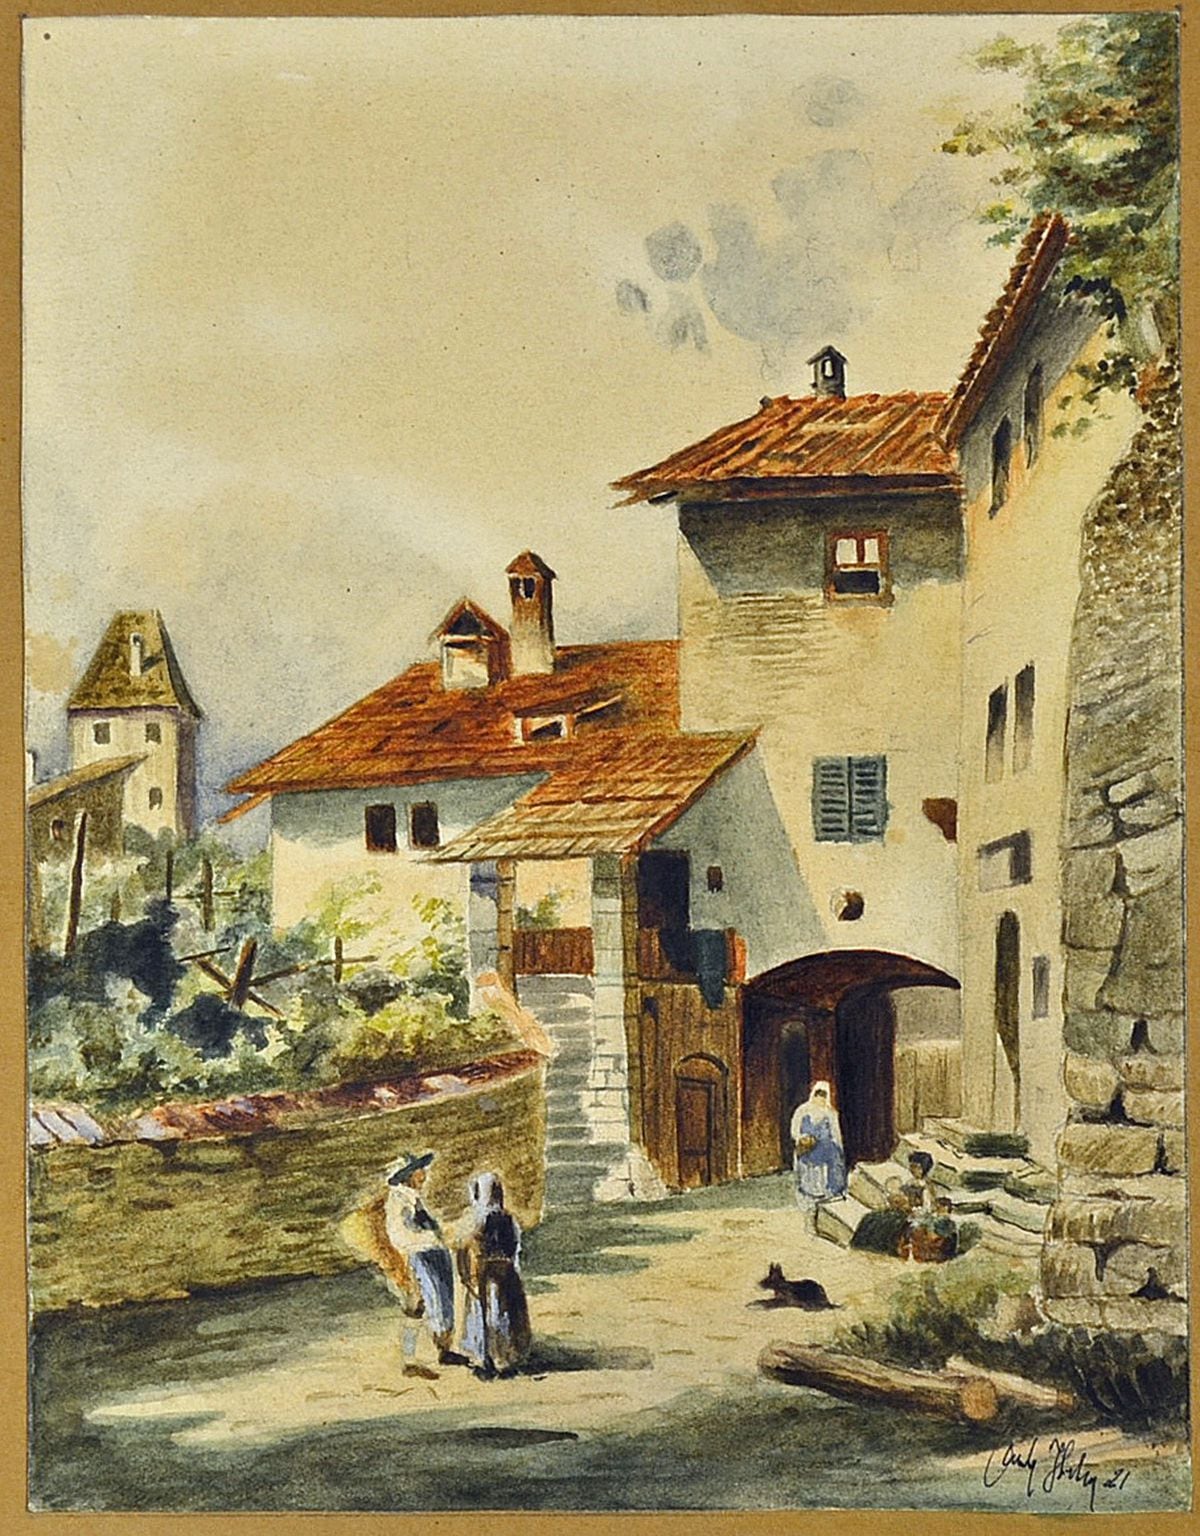 An artwork attributed to Adolf Hitler of the town gate at Dürnstein in the Wachau valley